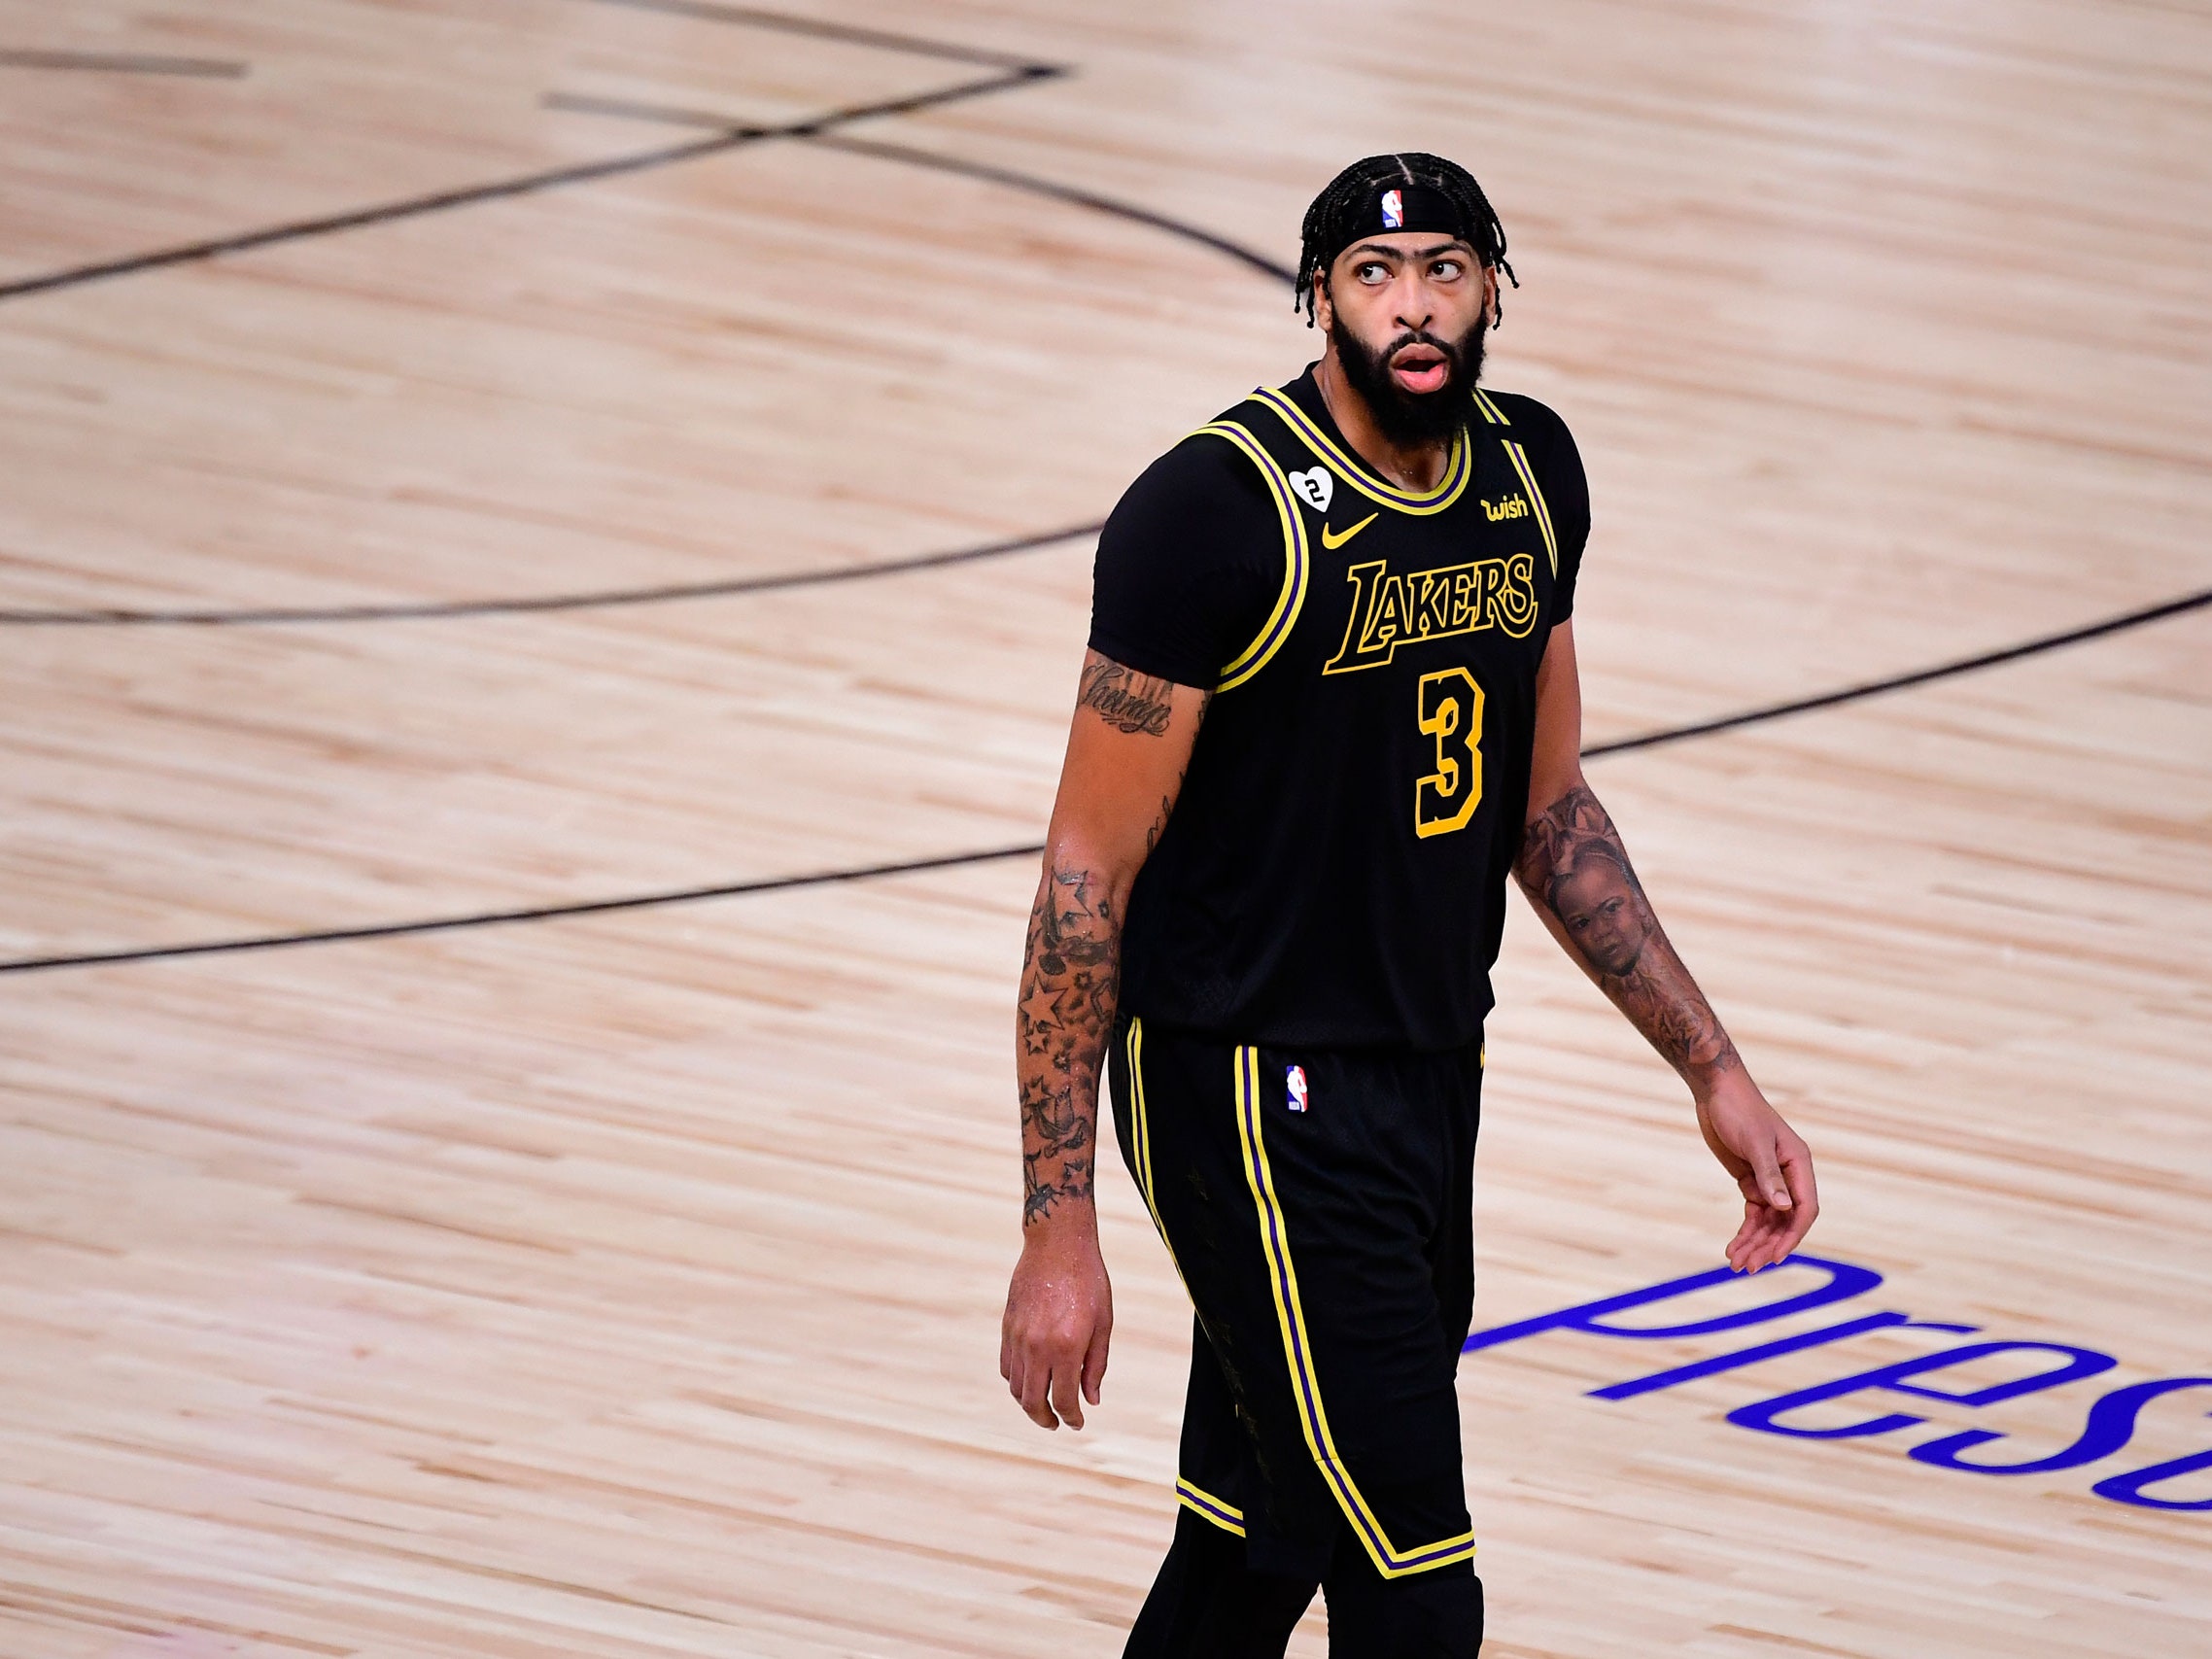 Pondering Anthony Davis, the Lakers' Oddly Enigmatic Star. The New Yorker